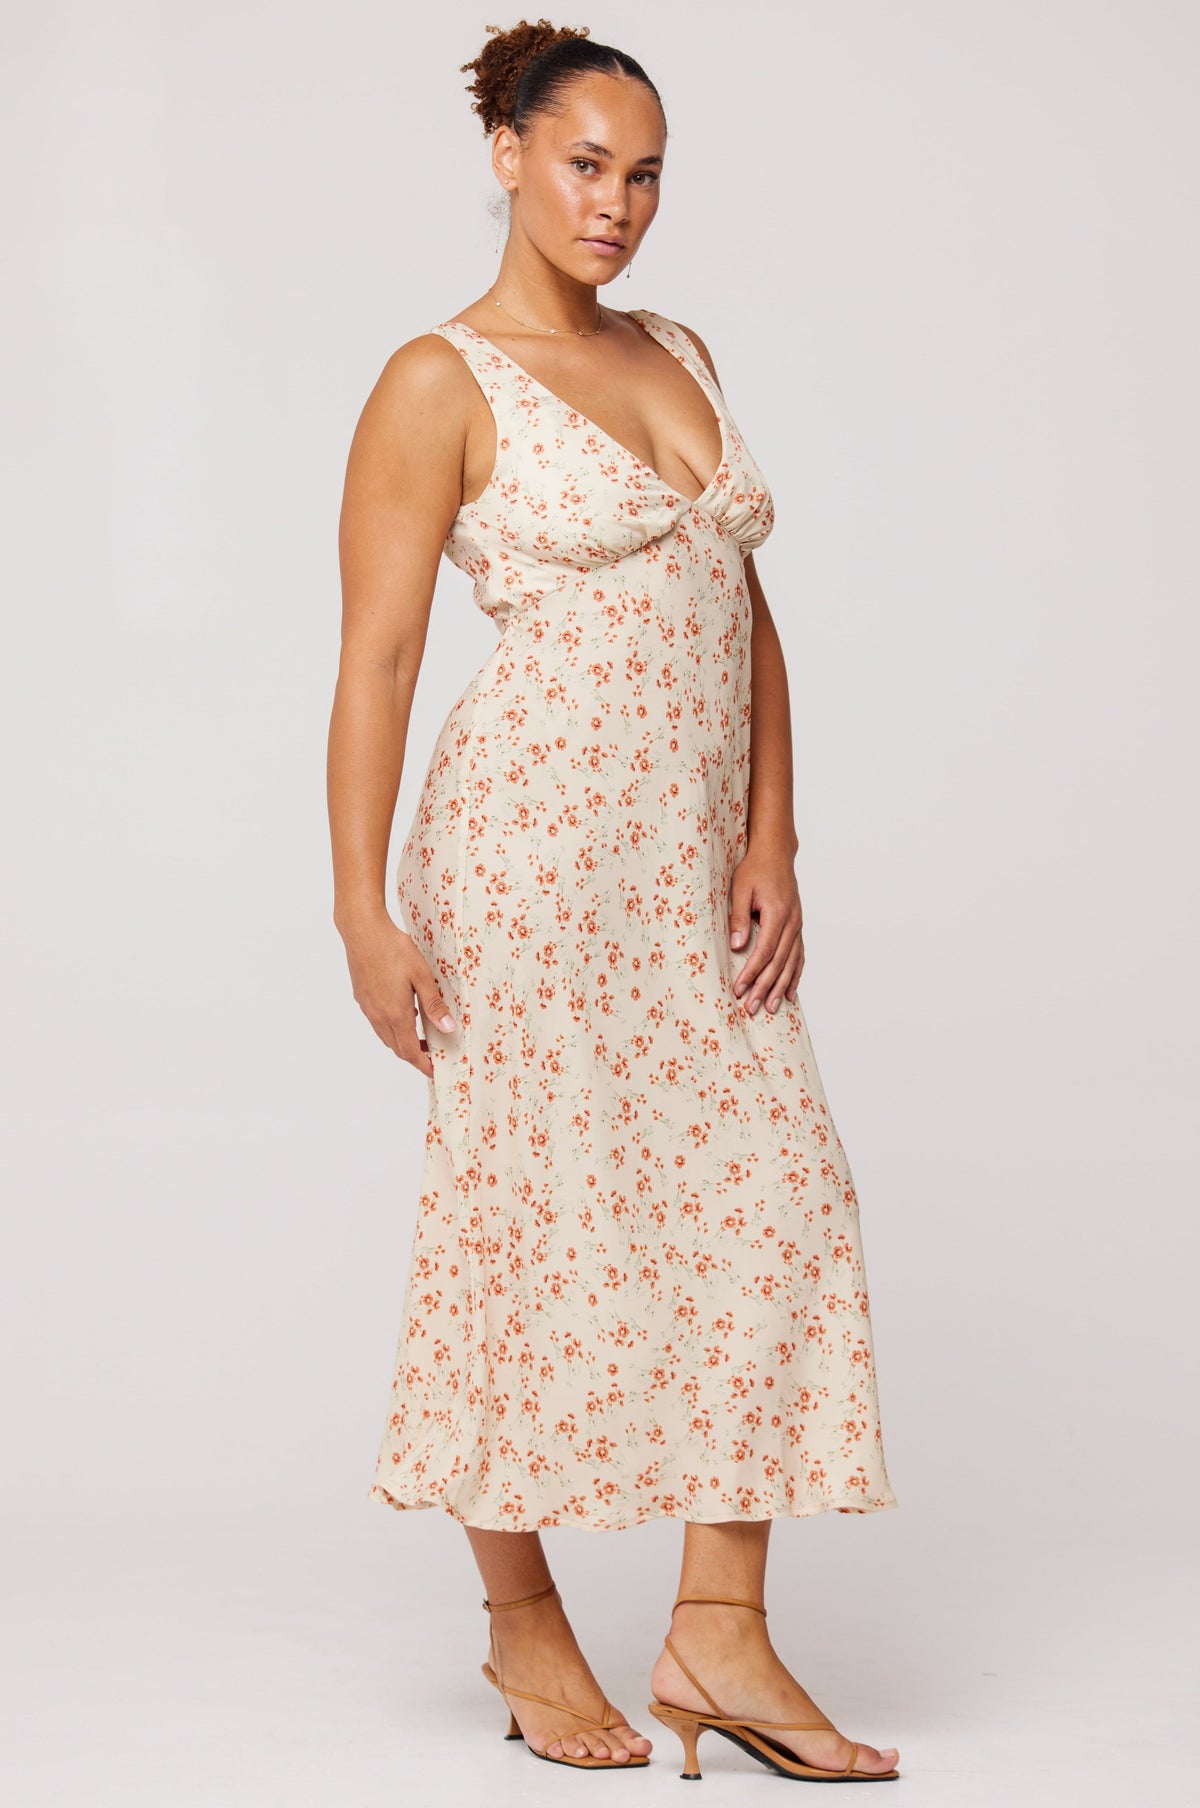 This is an image of Charlie Dress in Wildflower - RESA featuring a model wearing the dress